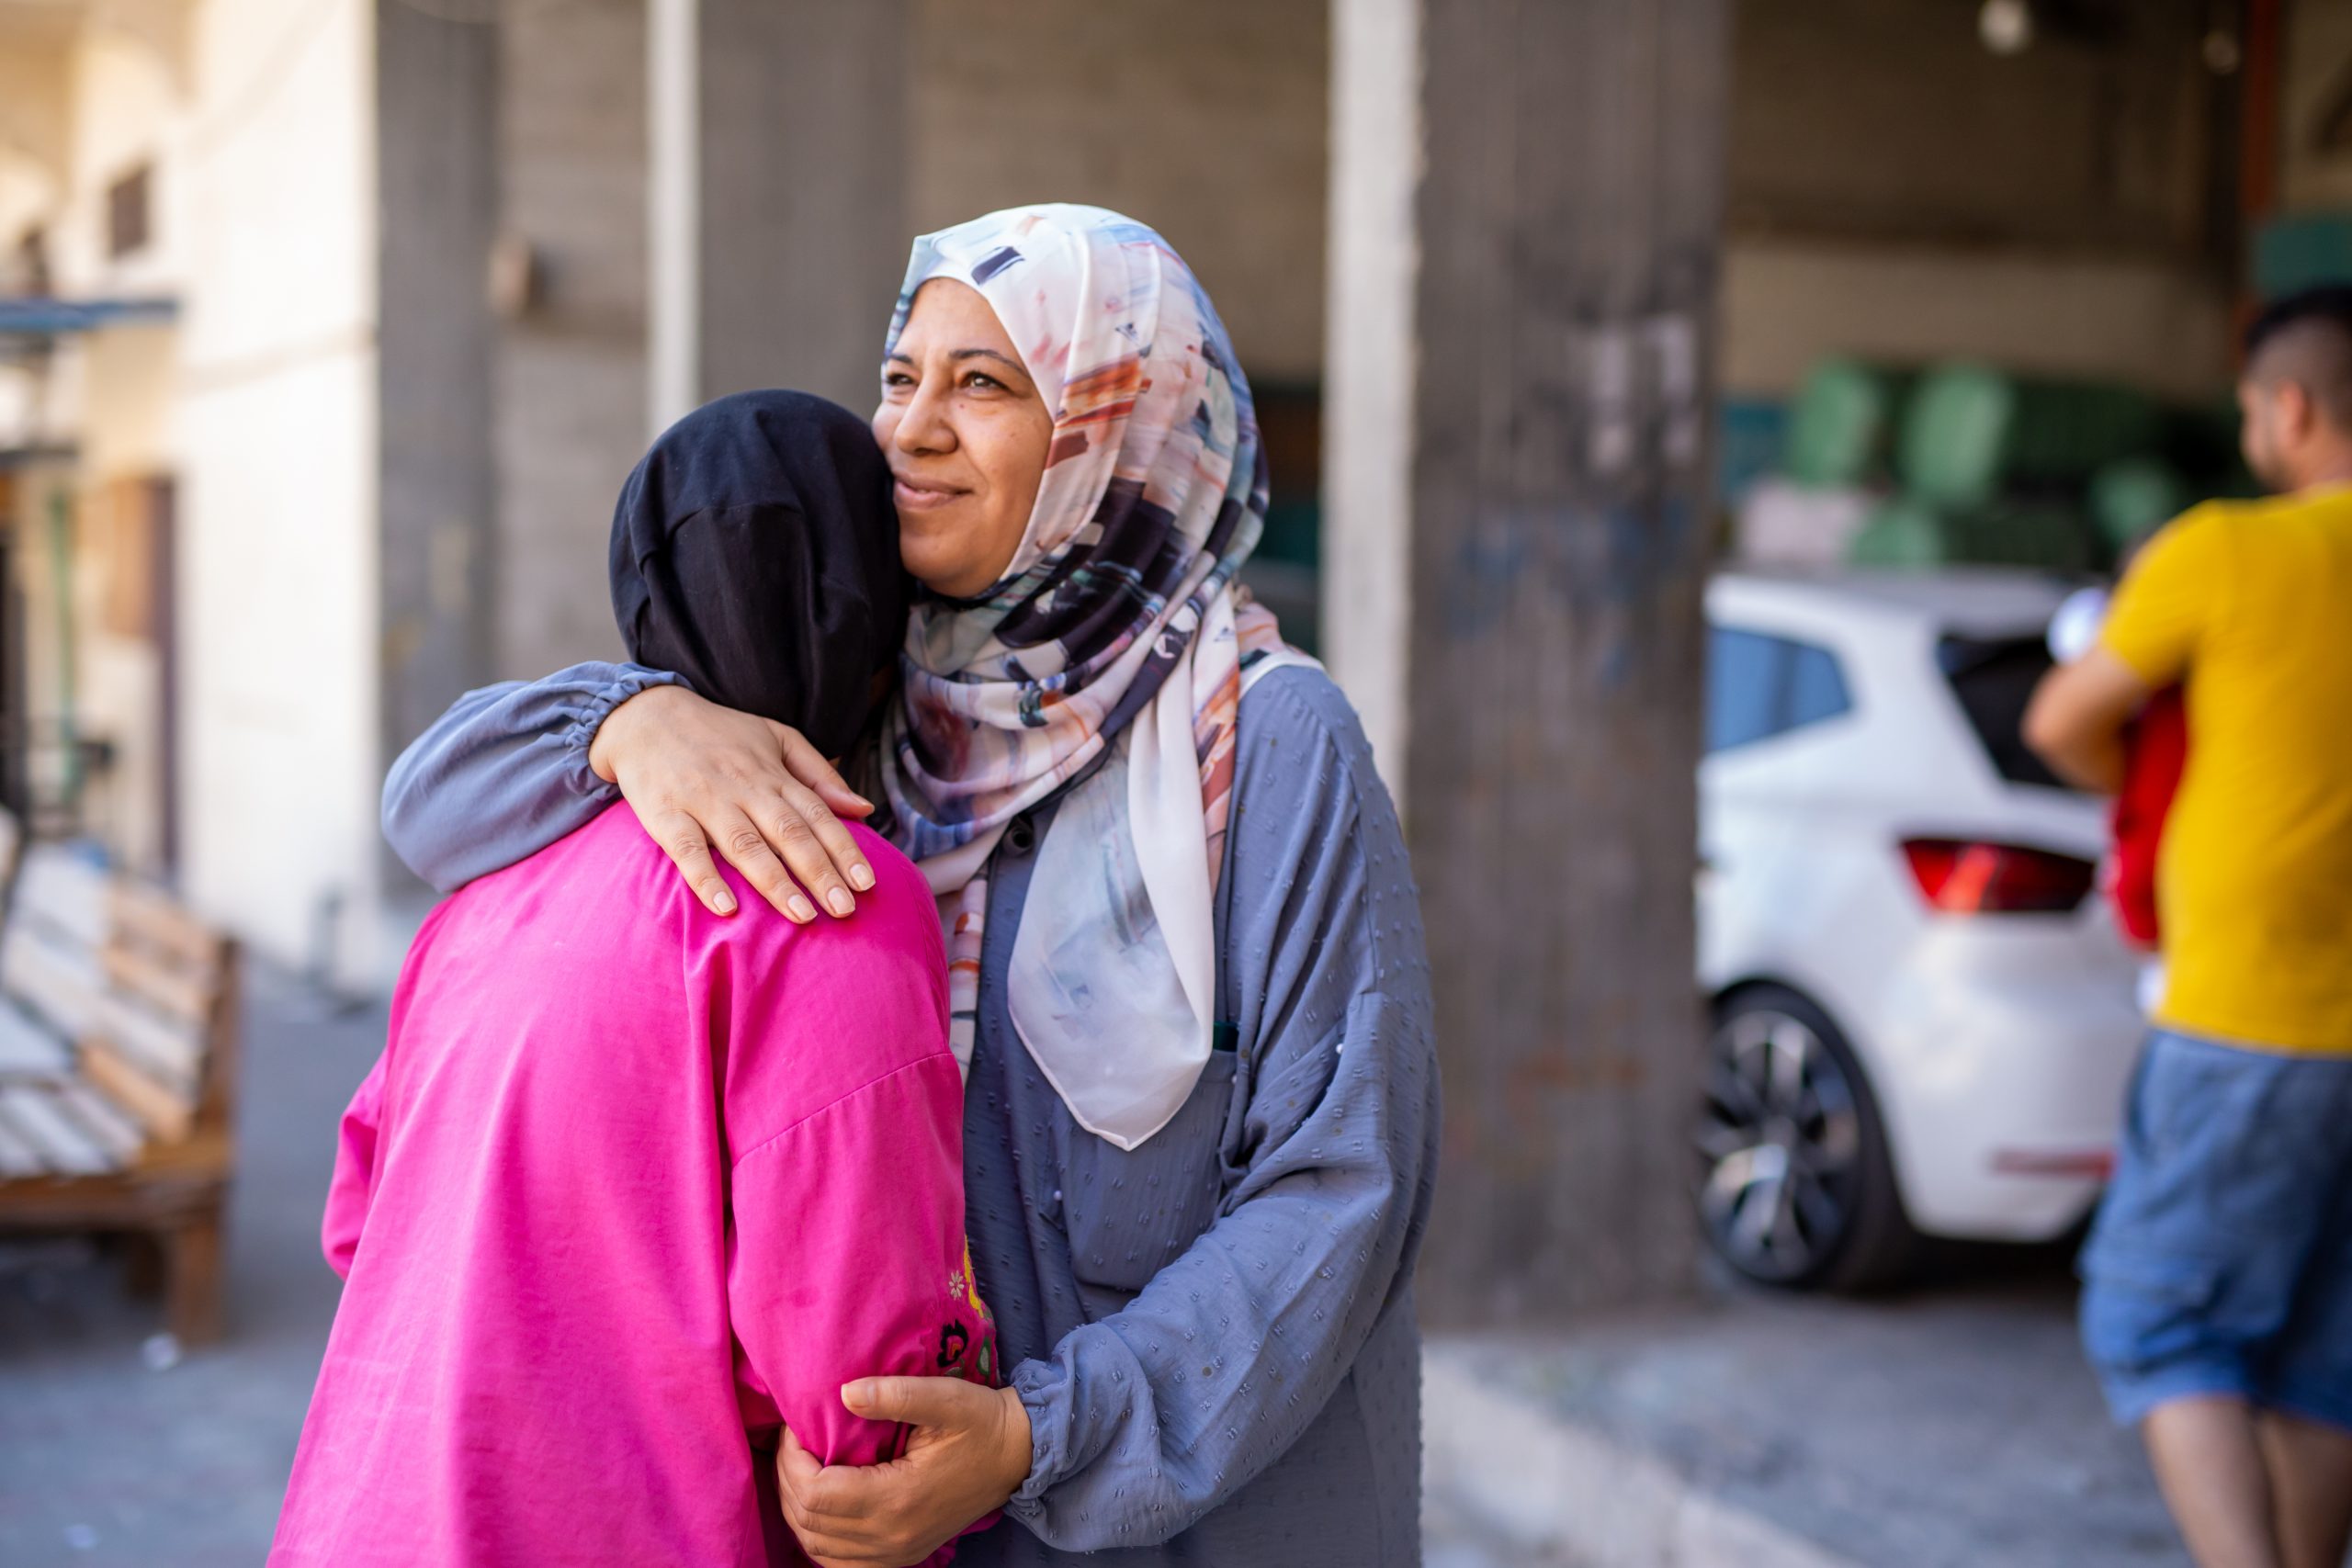 Palestinian Territory: Huwaida, who manages a shelter in the Gaza Strip, hugs her daughter. Photo: Marwan Sawwaf/Alef MultiMedia/Oxfam.